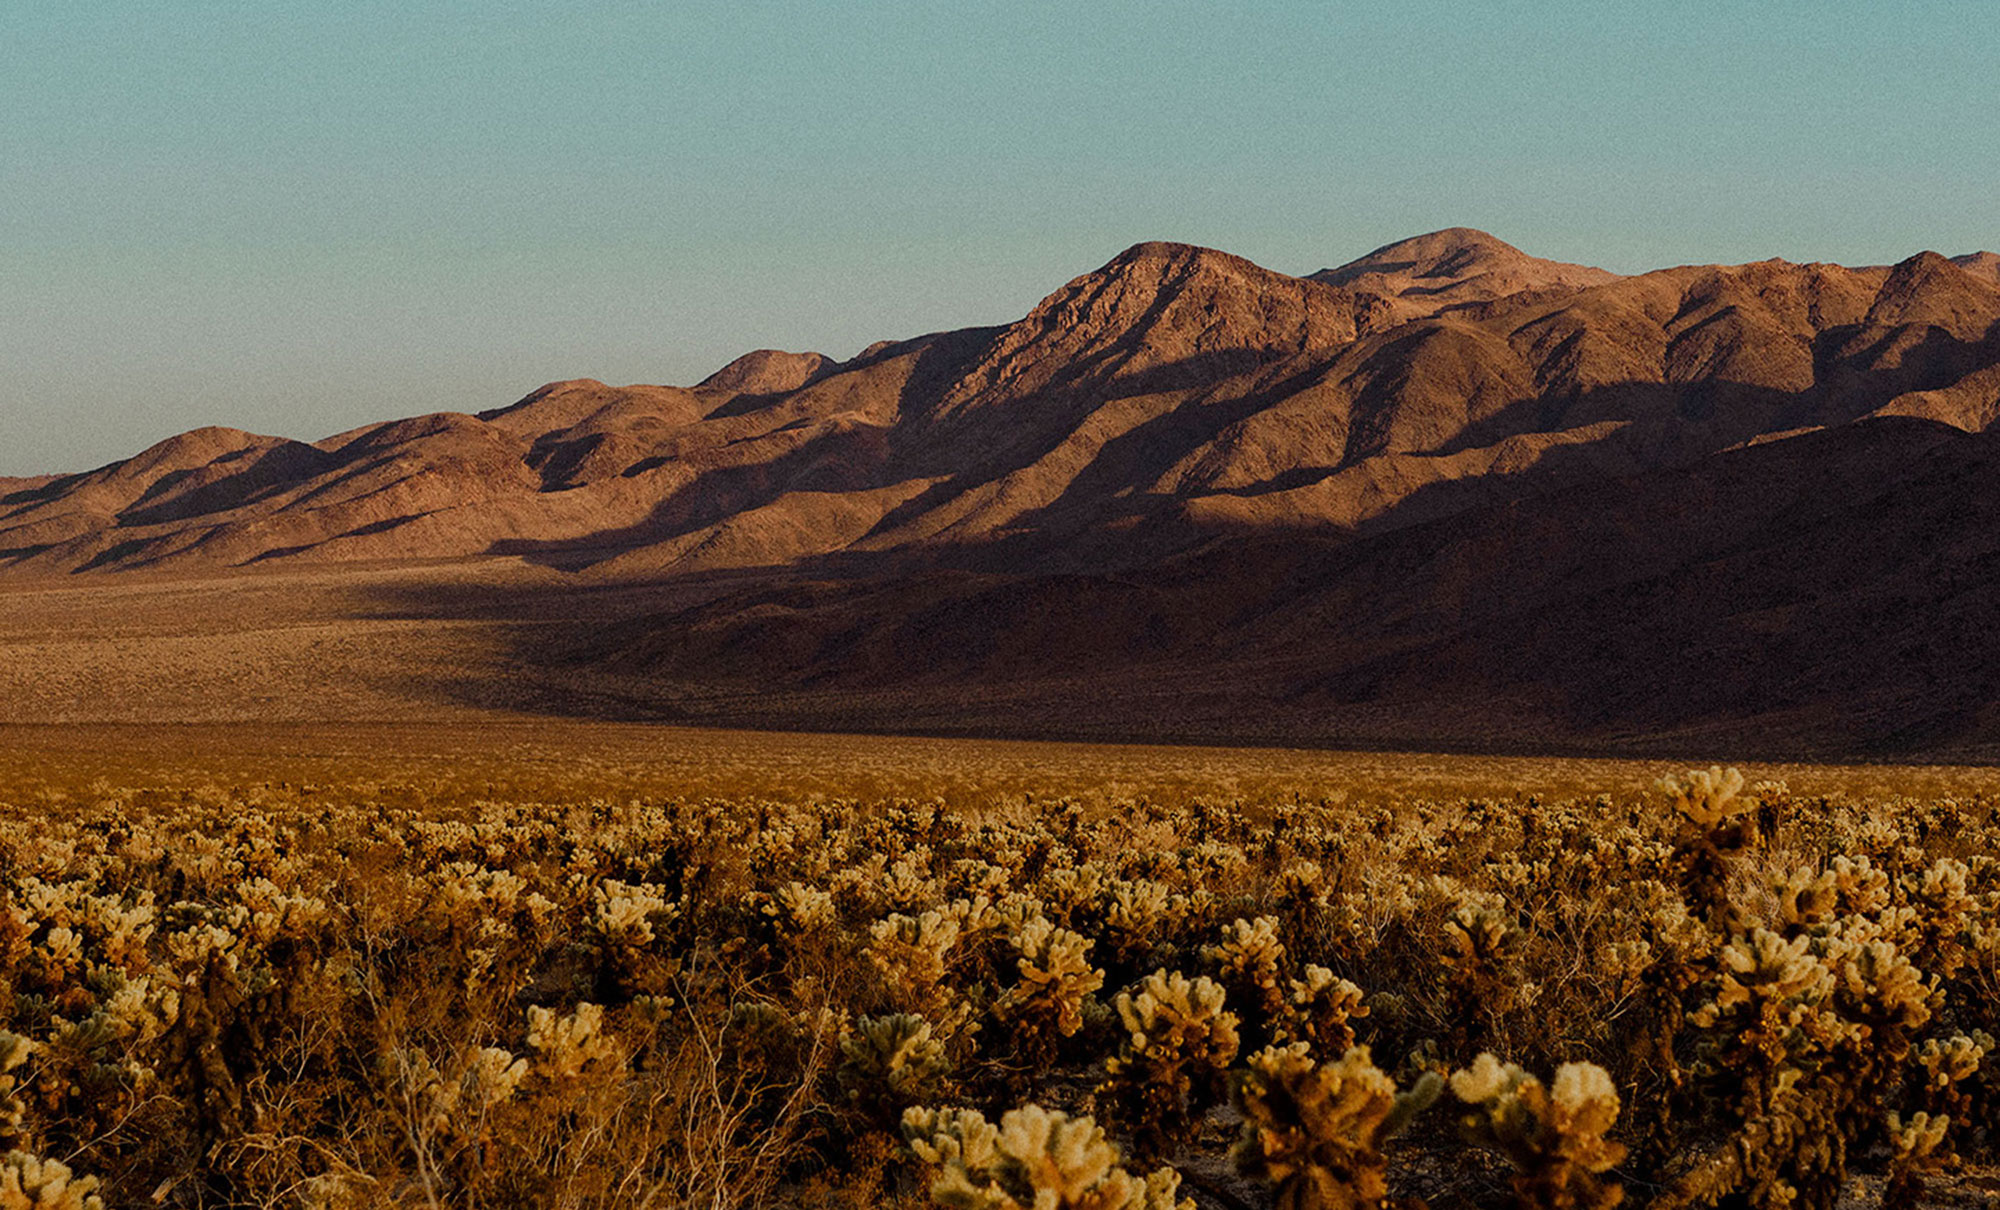 A desert landscape setting with golden yellow florals and brush in the foreground and rolling brown hills with blue sky in the background.